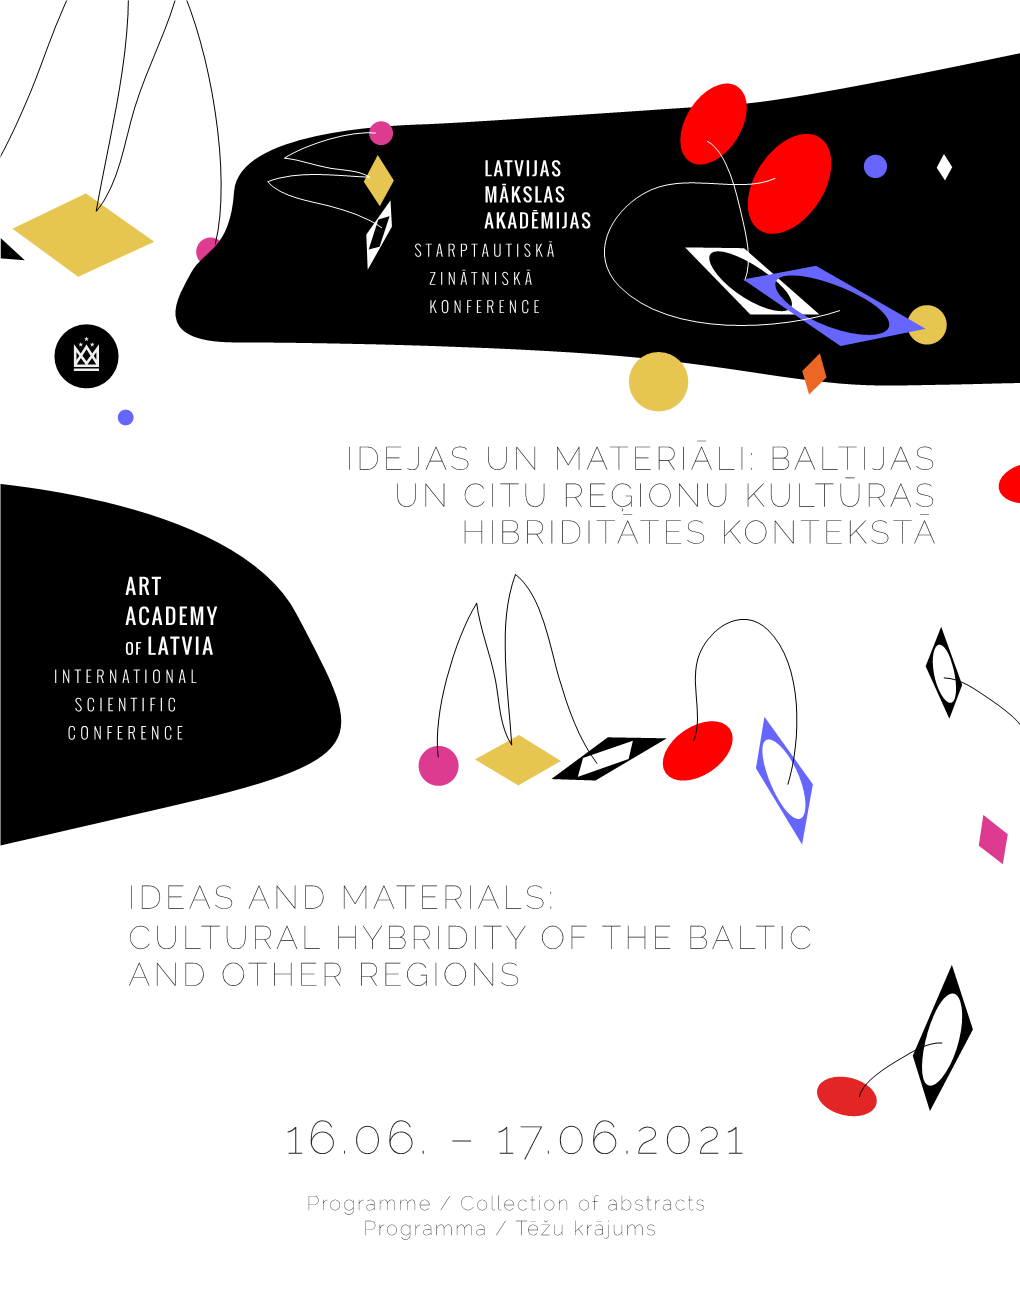 Ideas and Materials: Cultural Hybridity of the Baltic and Other Regions